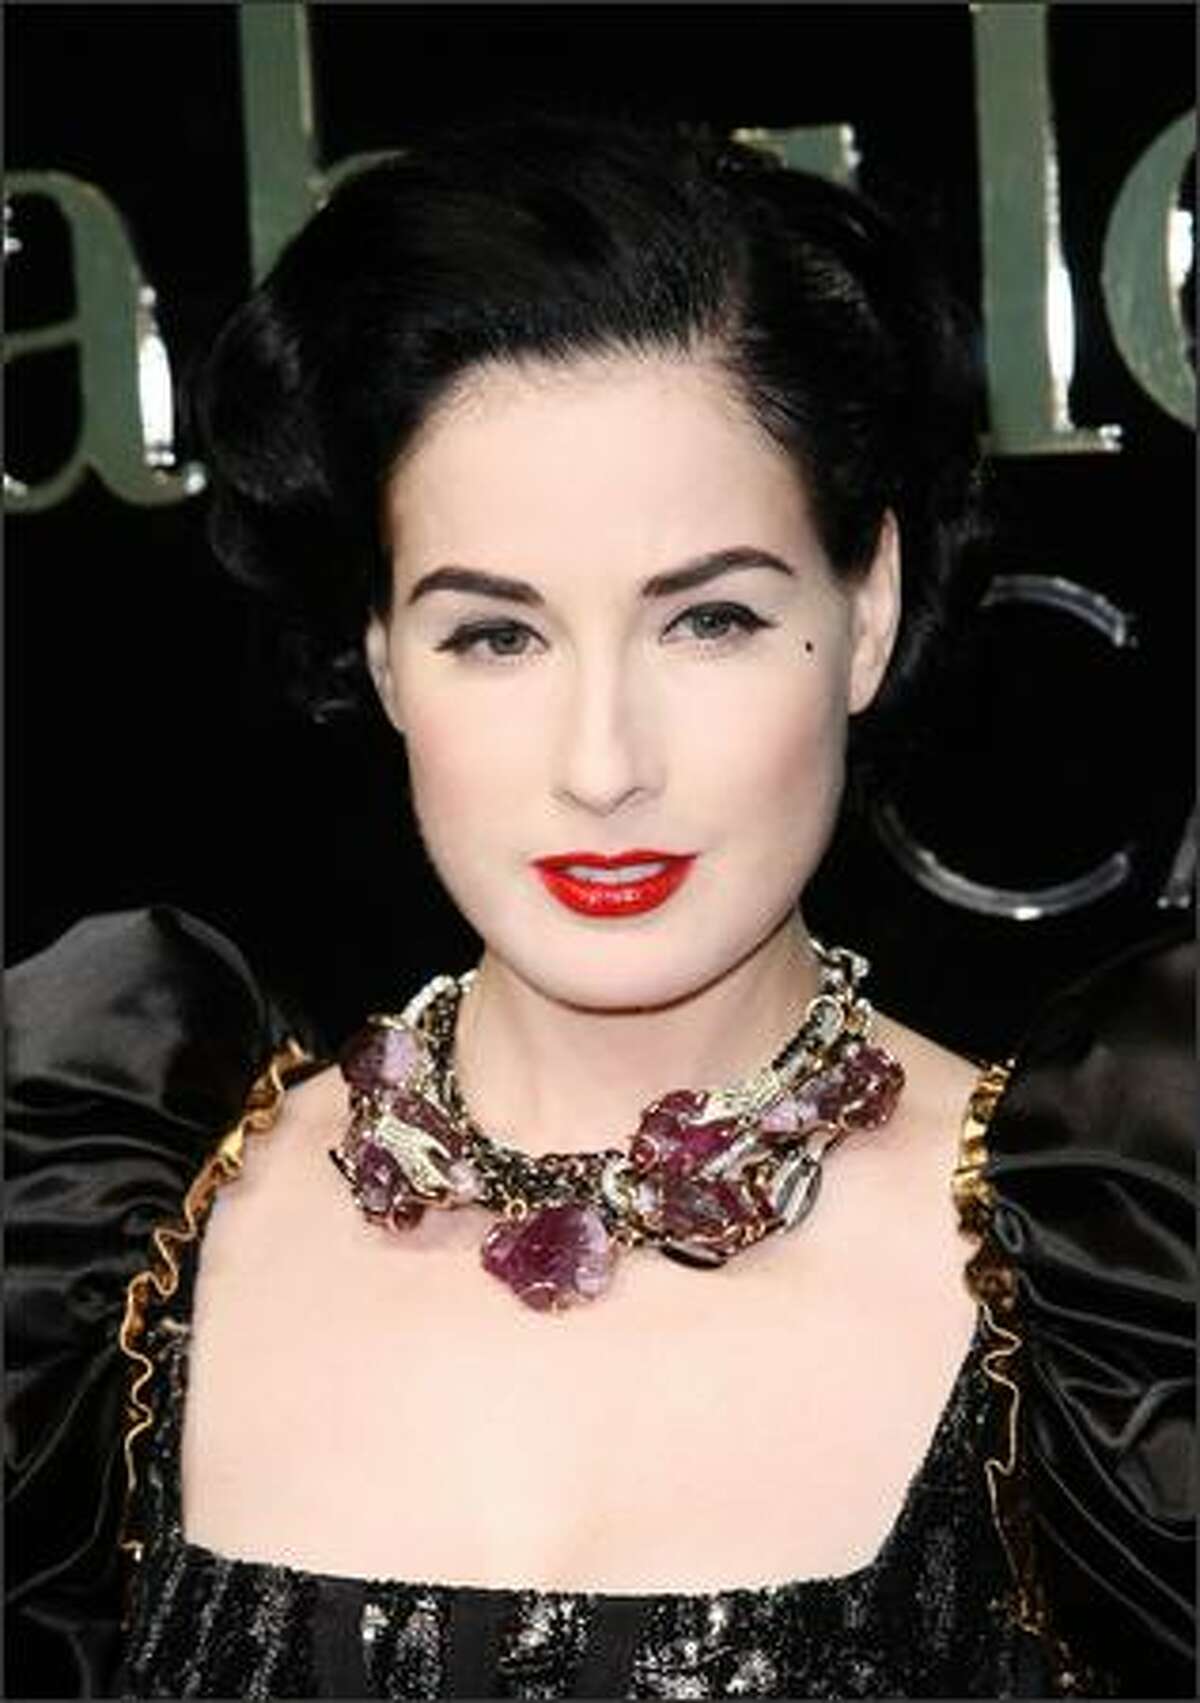 Dita Von Teese attends the Dolce & Gabbana party at the Le Baoly, Port Canto during the 62nd annual Cannes Film Festival in Cannes, France.